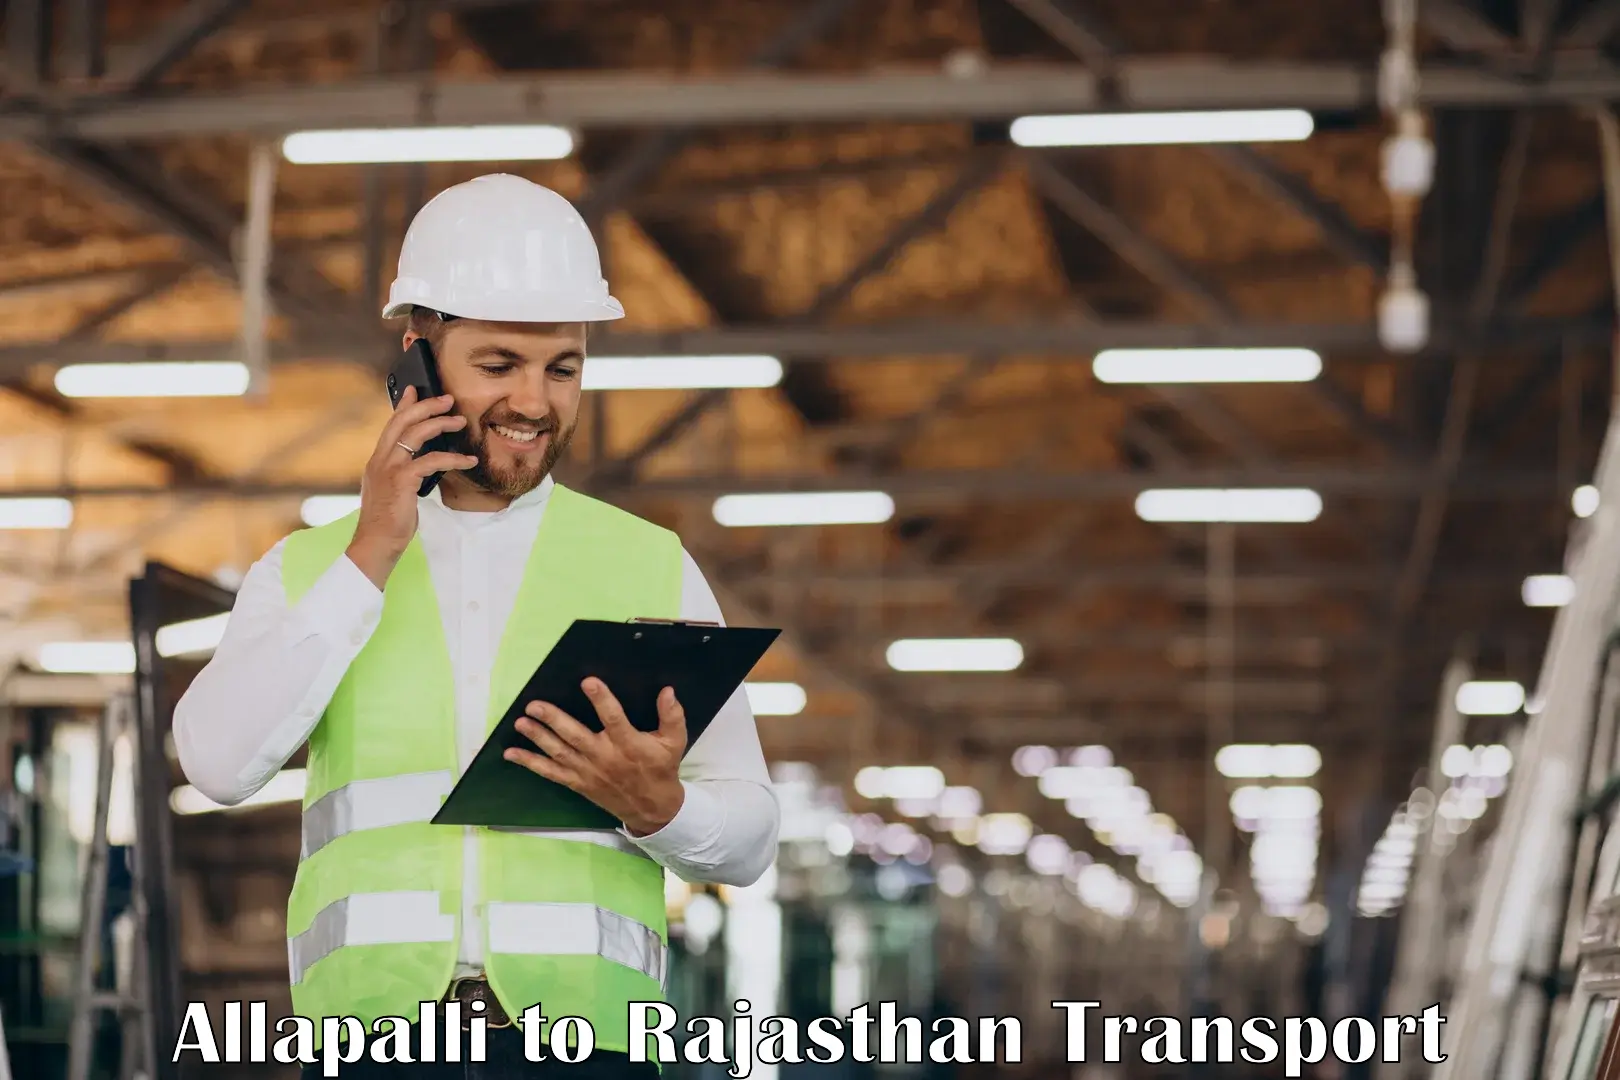 Transport shared services Allapalli to Parbatsar